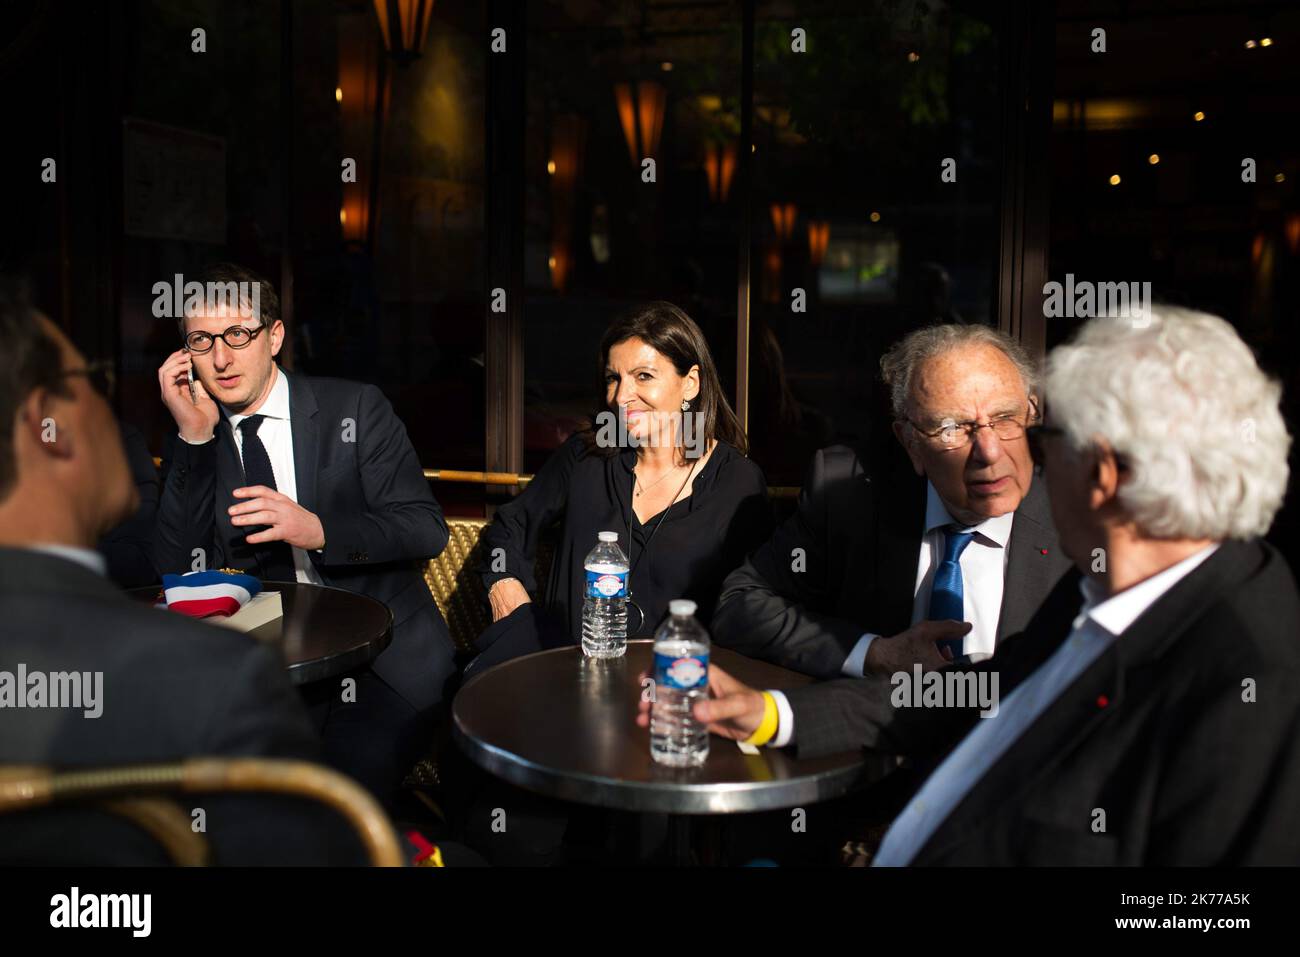 Anne Hidalgo stop to have a drink in a bar front of Notre Dame cathedral on April 18, 2019 in Paris. France paid a daylong tribute on April 18, 2019 to the Paris firefighters who saved Notre Dame Cathedral from collapse, while construction workers rushed to secure an area above one of the church's famed rose-shaped windows and other vulnerable sections of the fire-damaged landmark.  Stock Photo